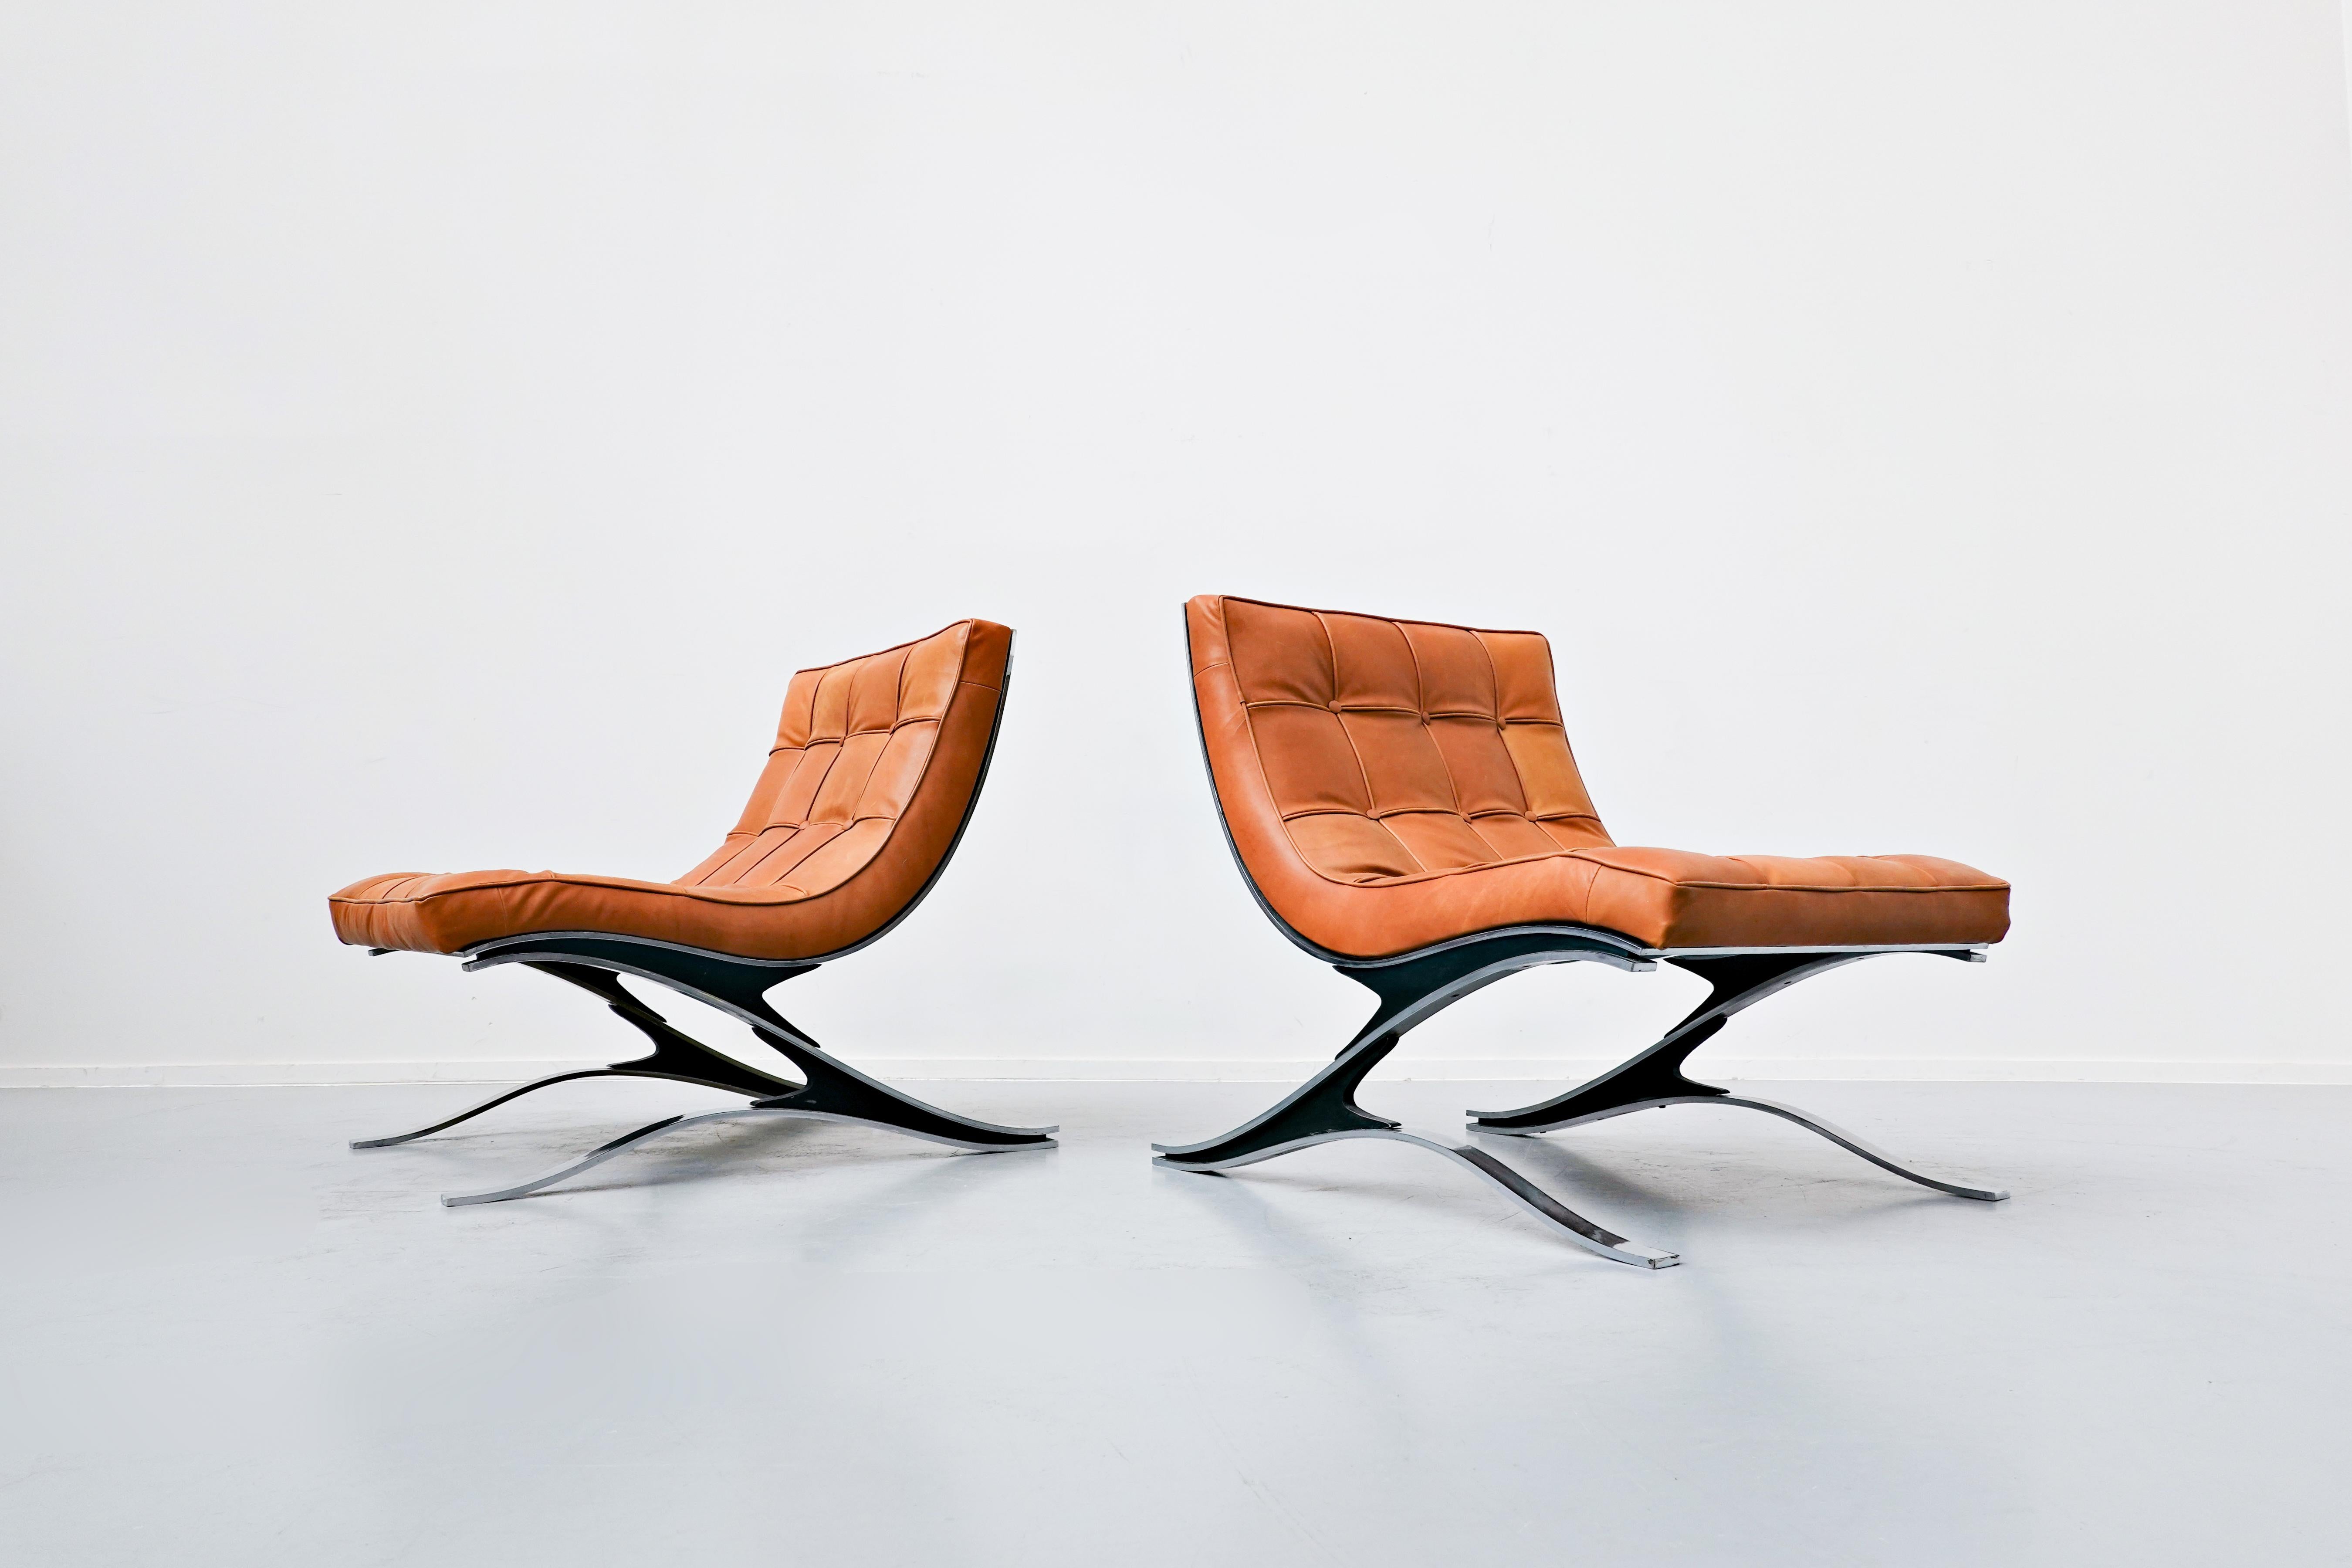 Pair of Italian armchairs Pizzetti, steel and leather, 1970s.